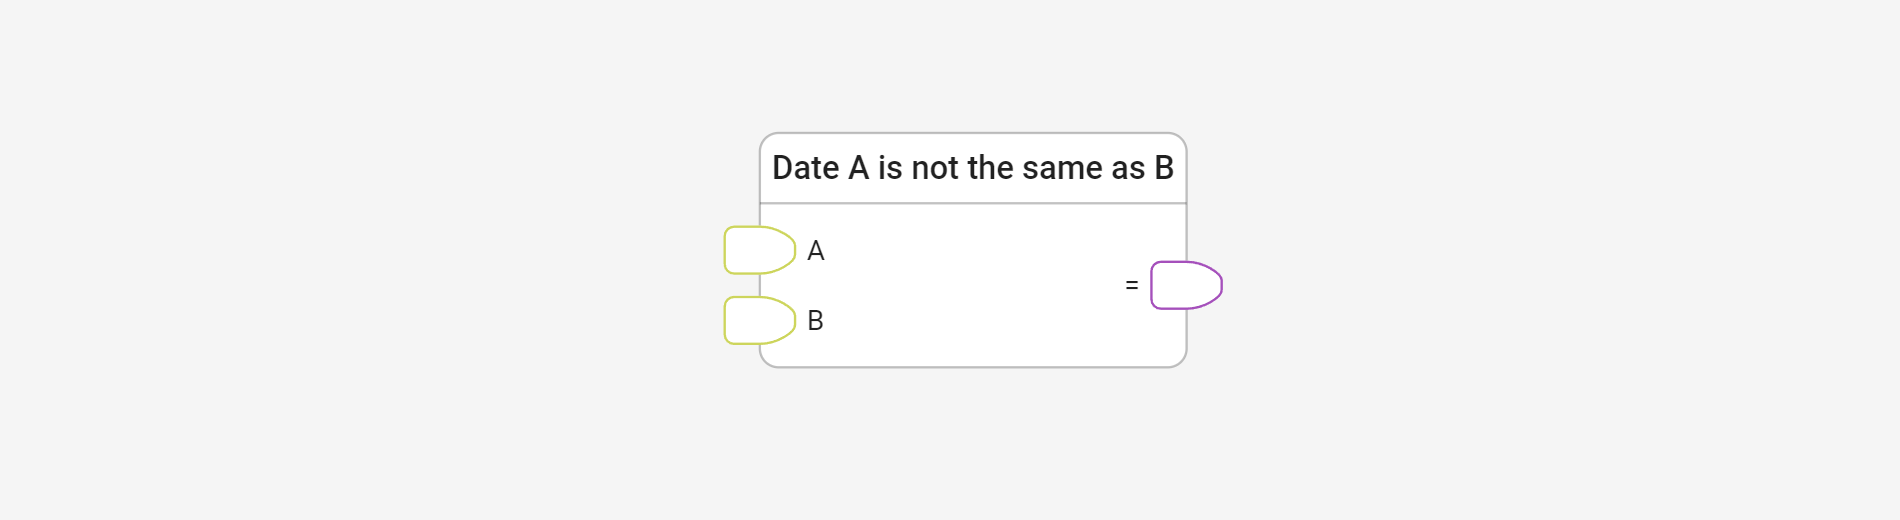 Check date using Date A is not the same as B